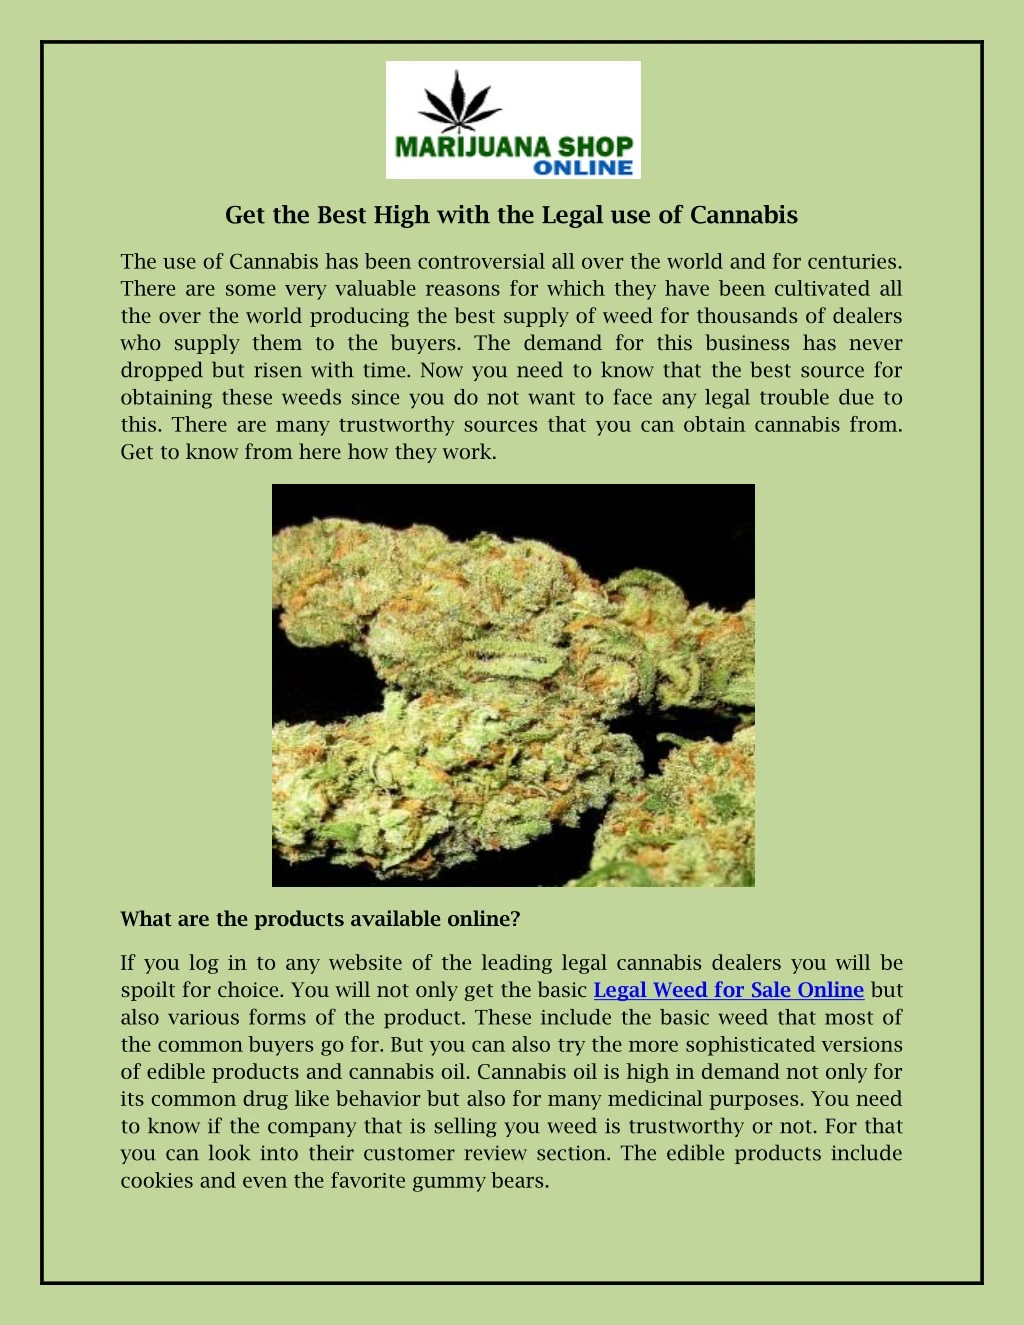 get the best high with the legal use of cannabis